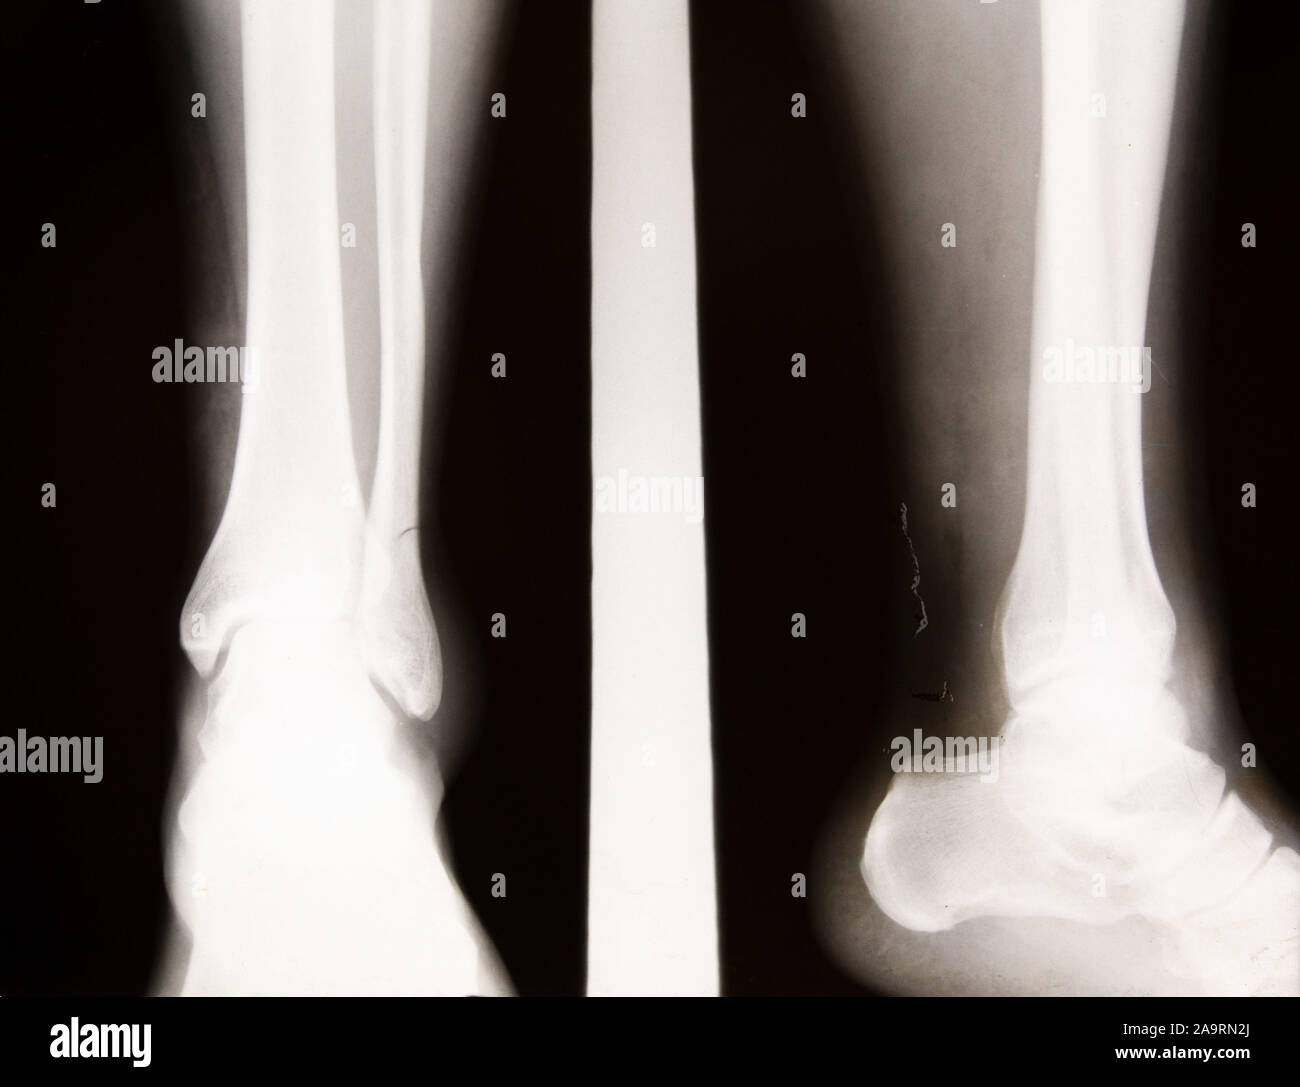 Shin Bone High Resolution Stock Photography and Images - Alamy